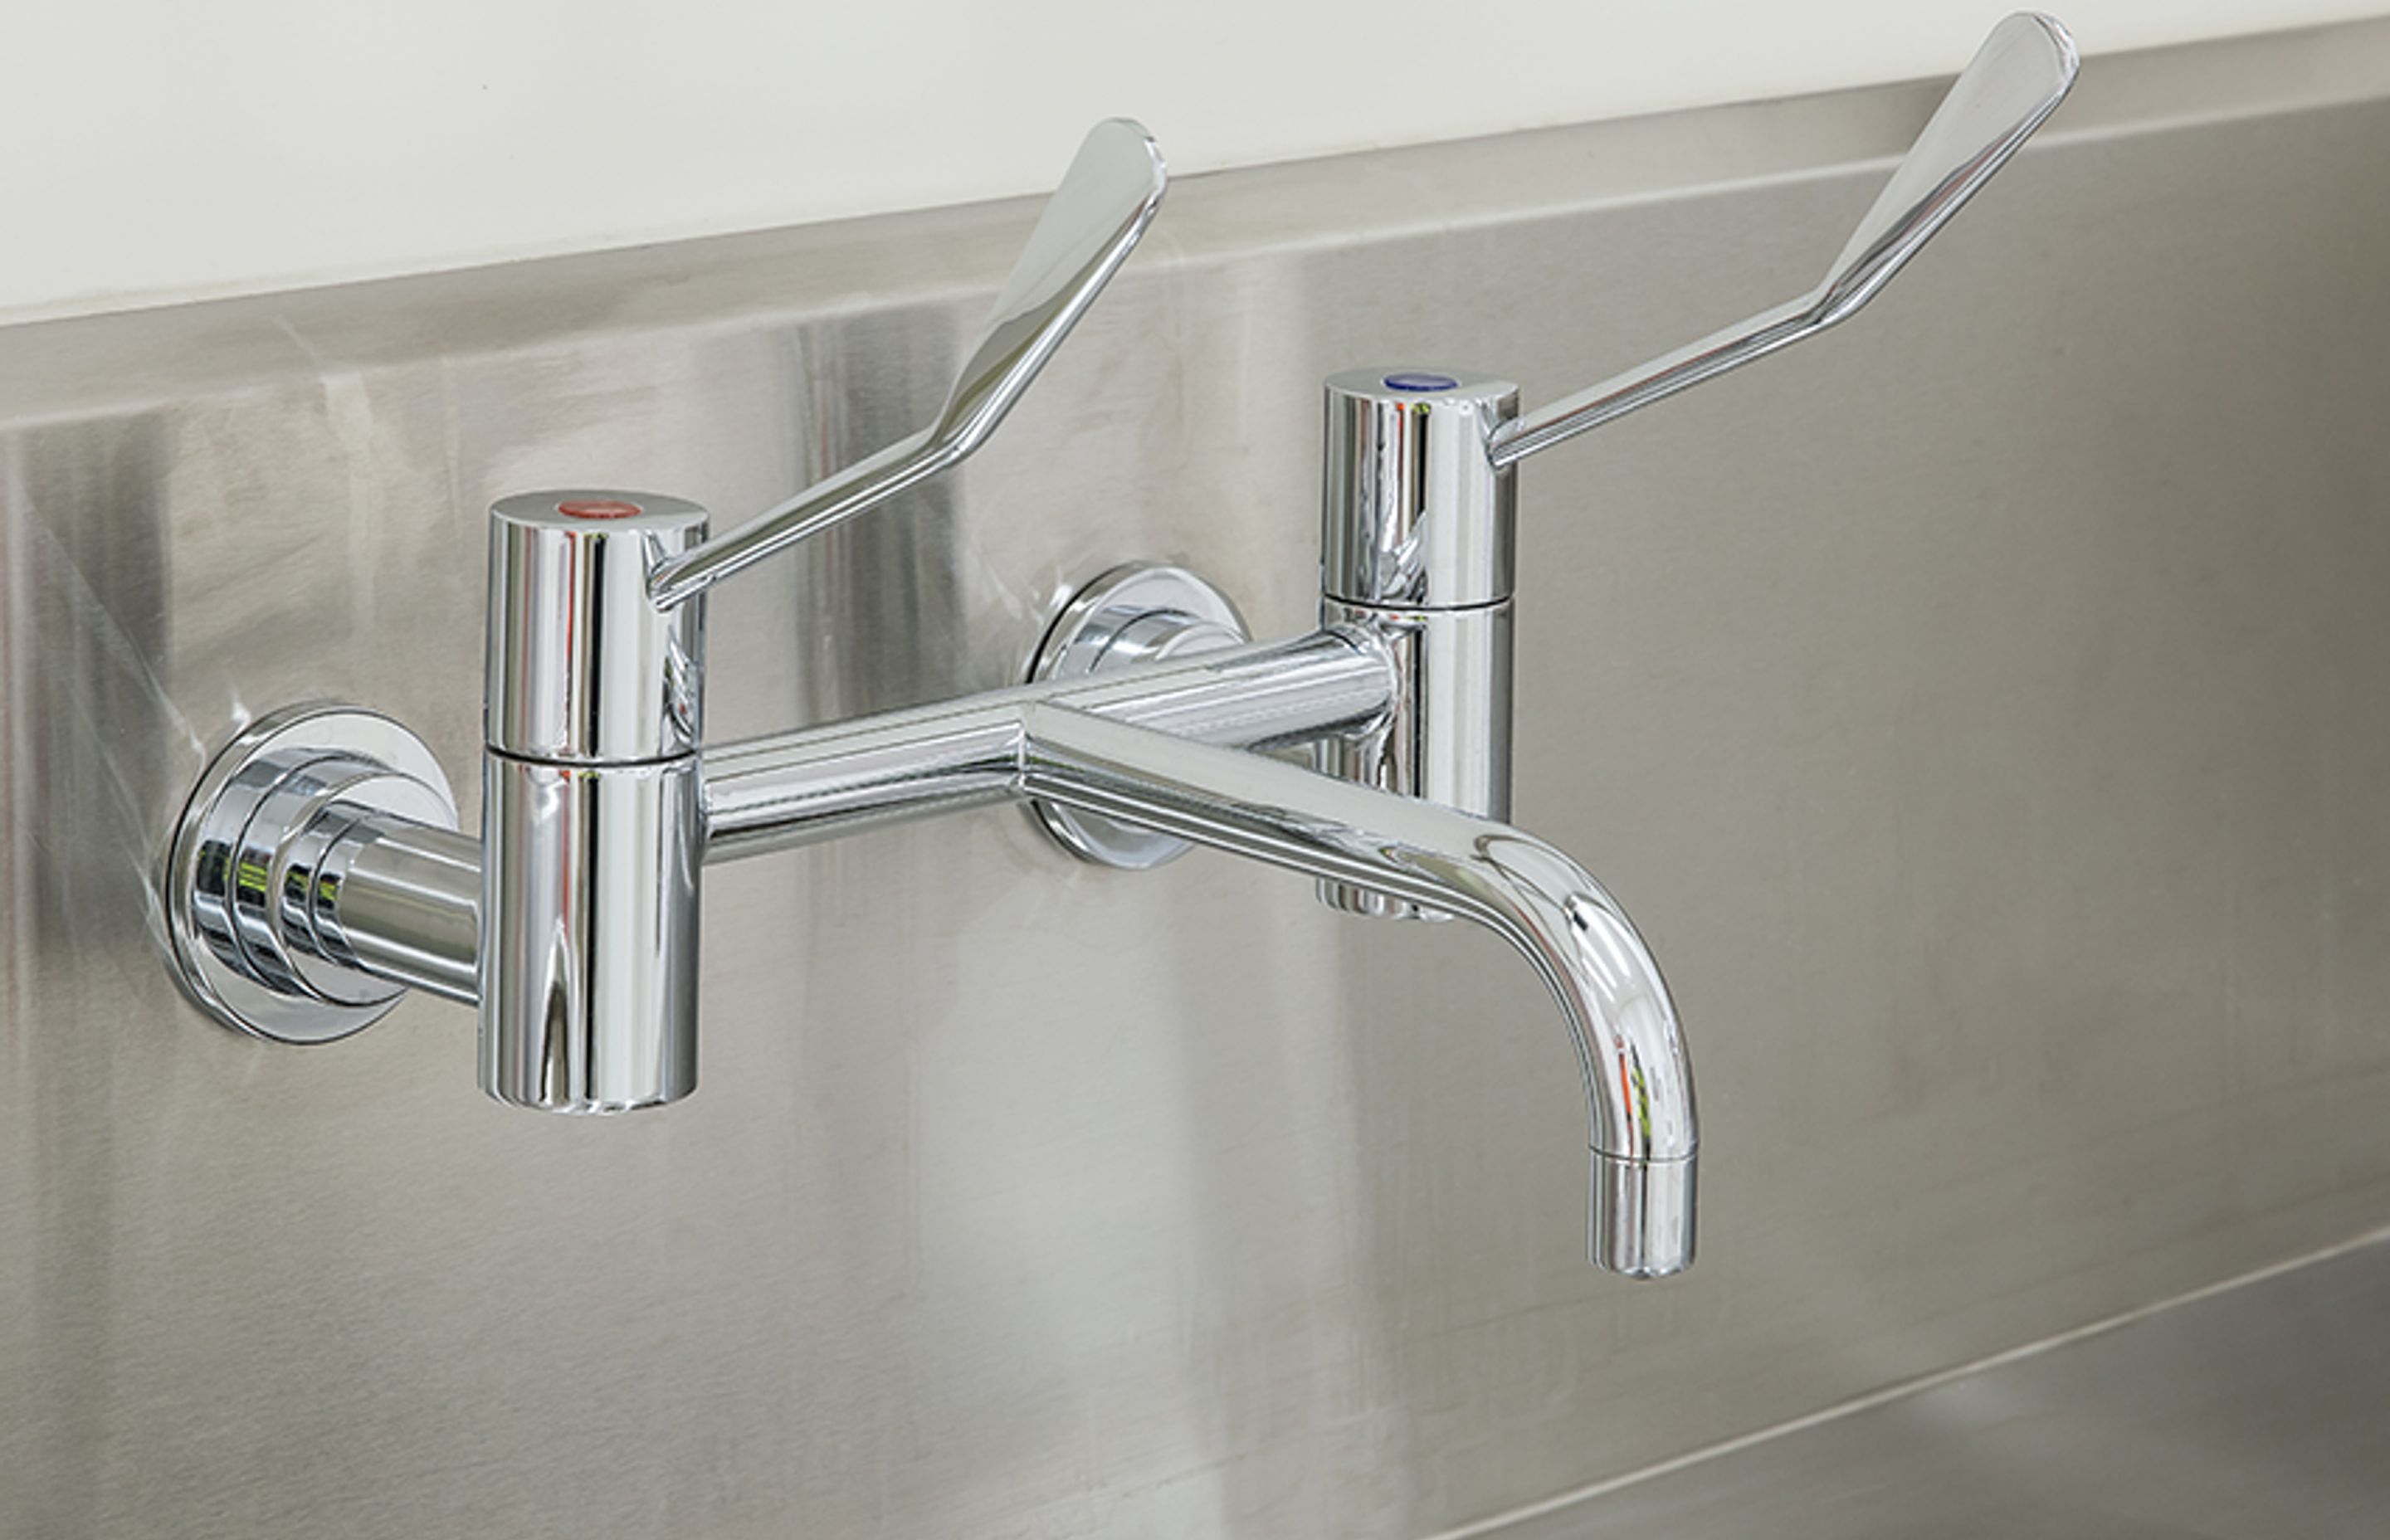 Manufactured from high-grade stainless steel and with a design incorporating minimal crevices, the Cleanline range has been designed to reduce the risk of bacteria build up.